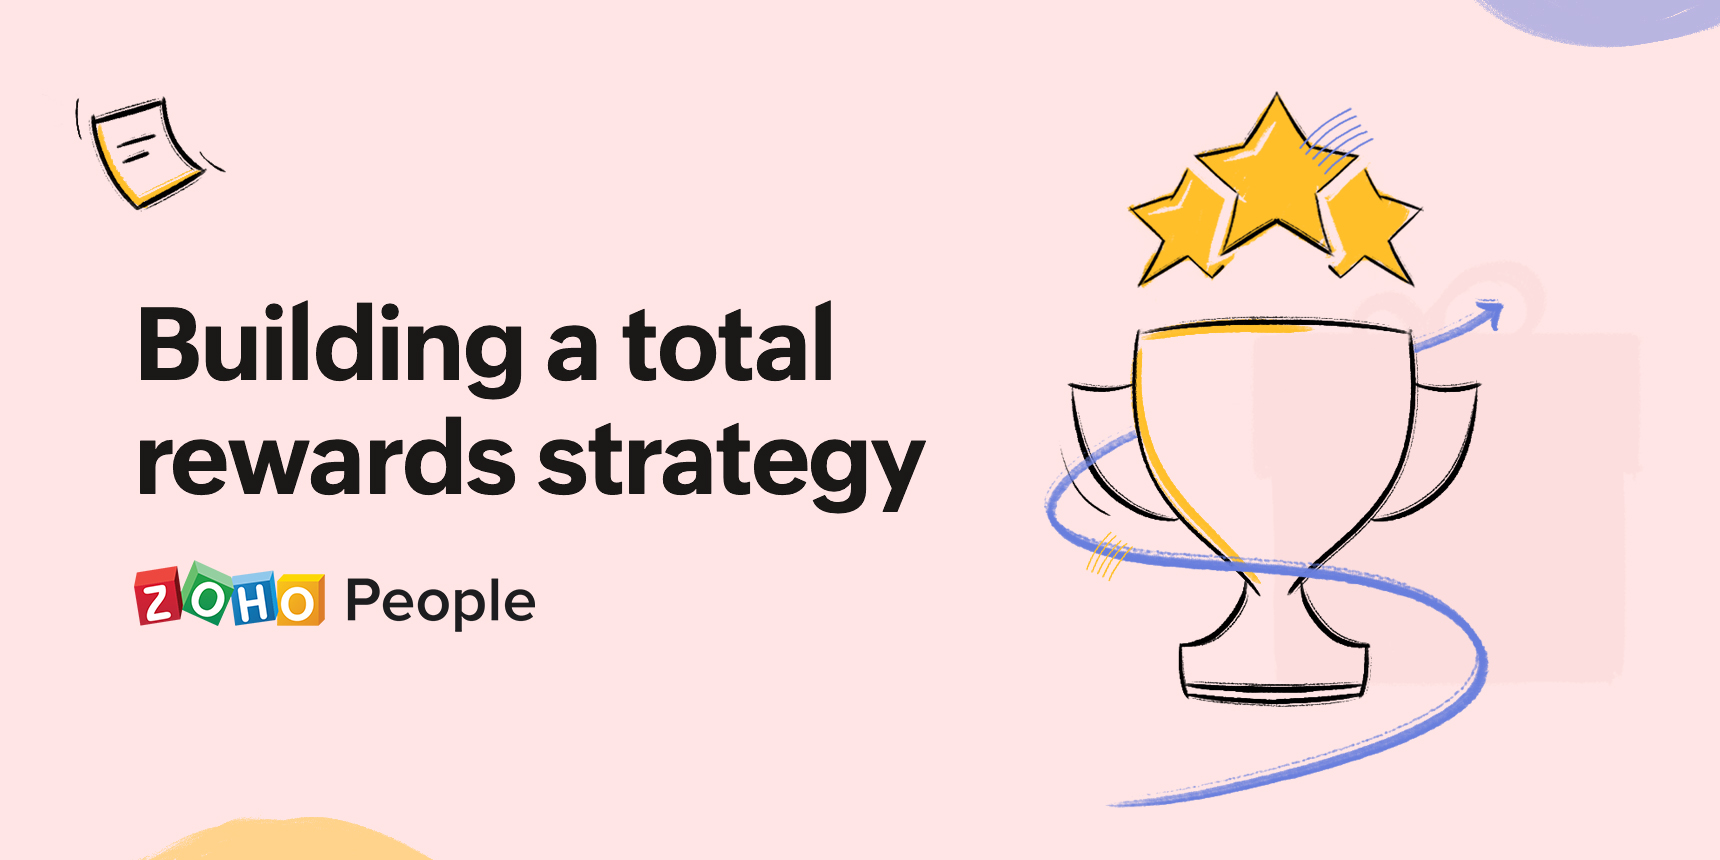 Tips to build a total rewards strategy